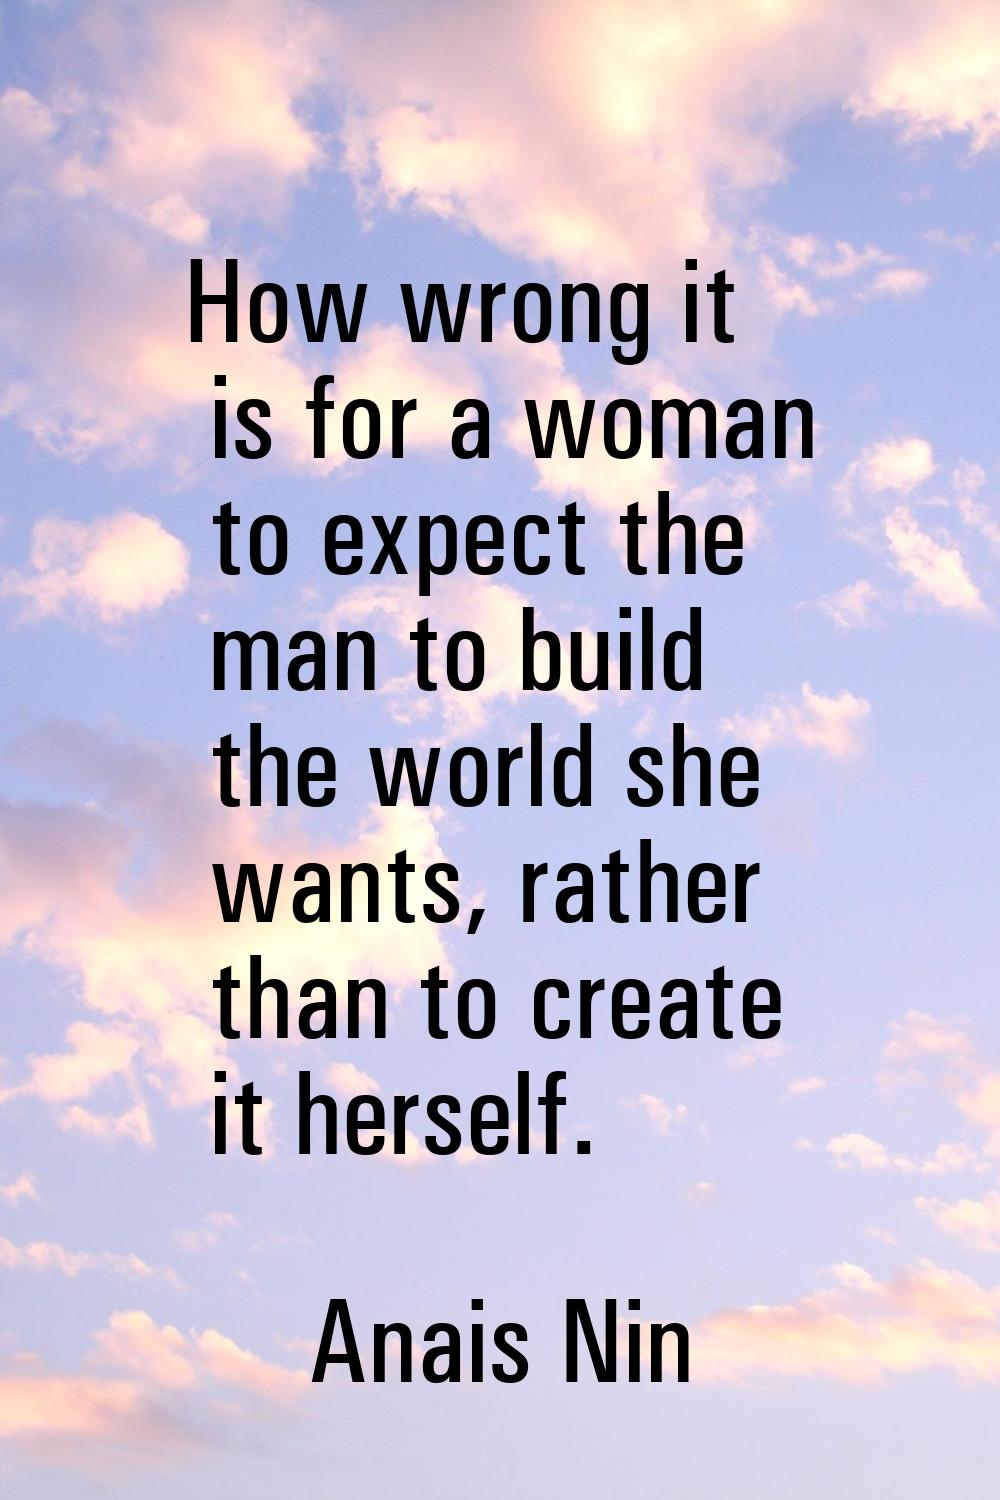 How wrong it is for a woman to expect the man to build the world she wants, rather than to create i